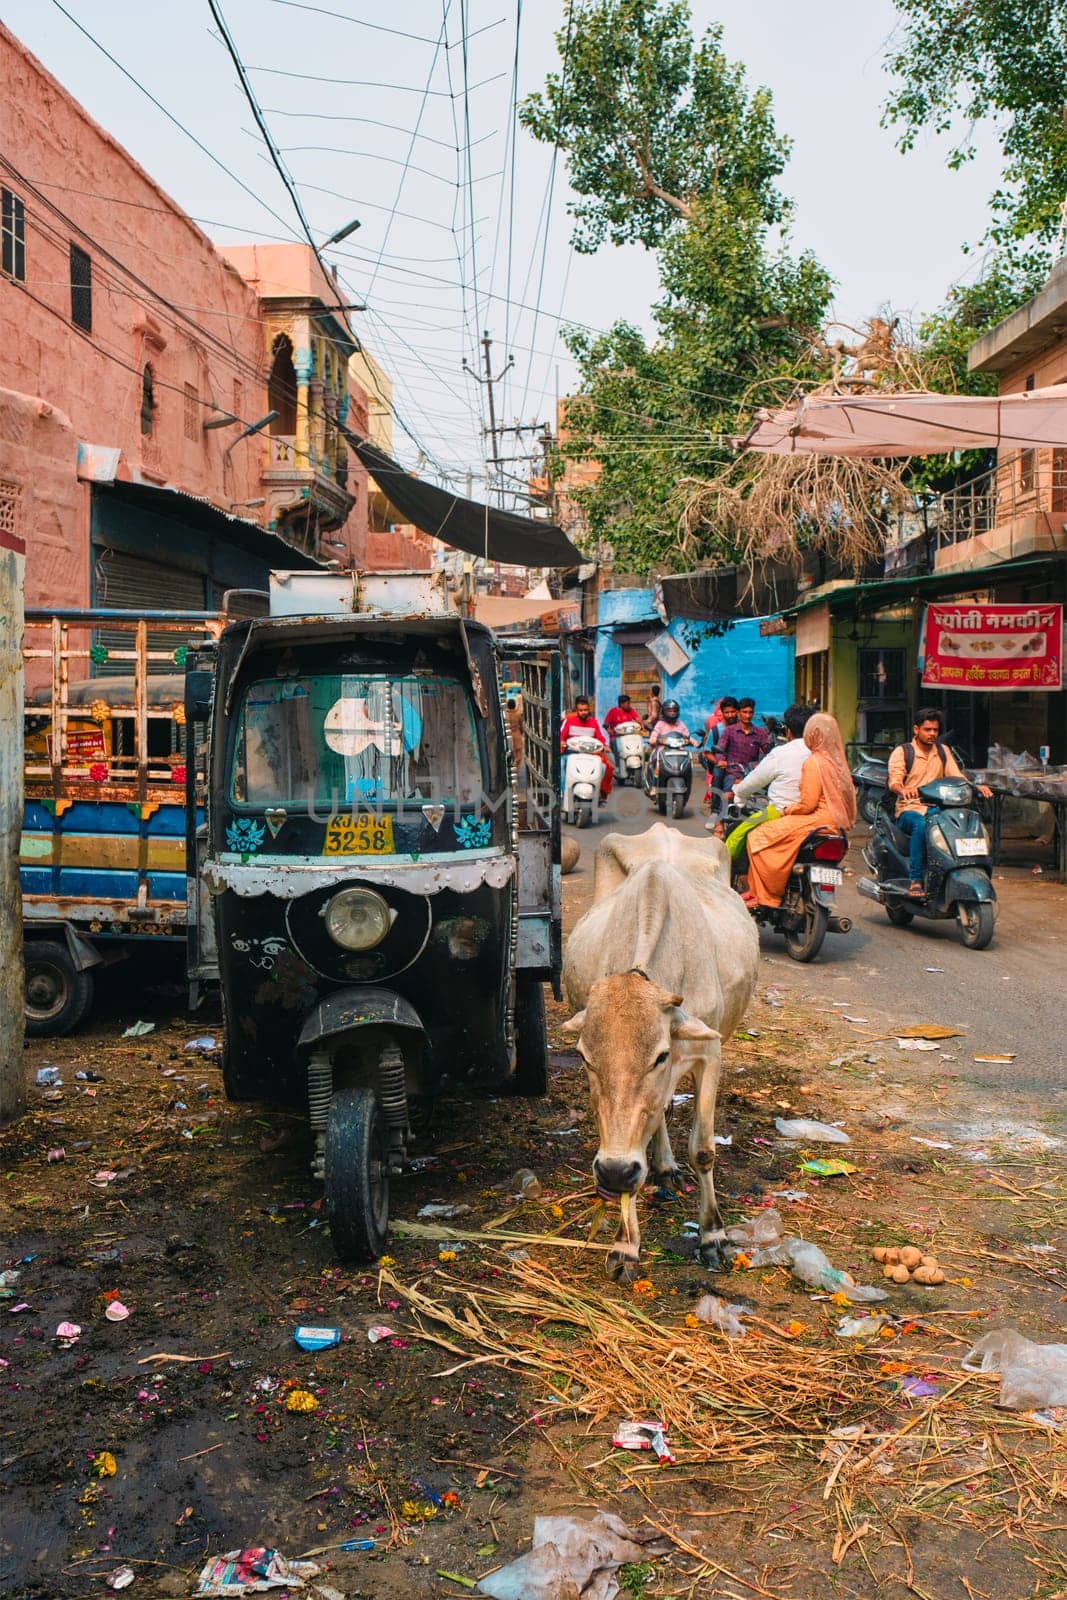 Jodhpur, India - November 14, 2019: Indian street with auto rickshaw, motorcycles, cow and trash on ground. Motorcycle and auto rickshaw are very common transportation options in India.